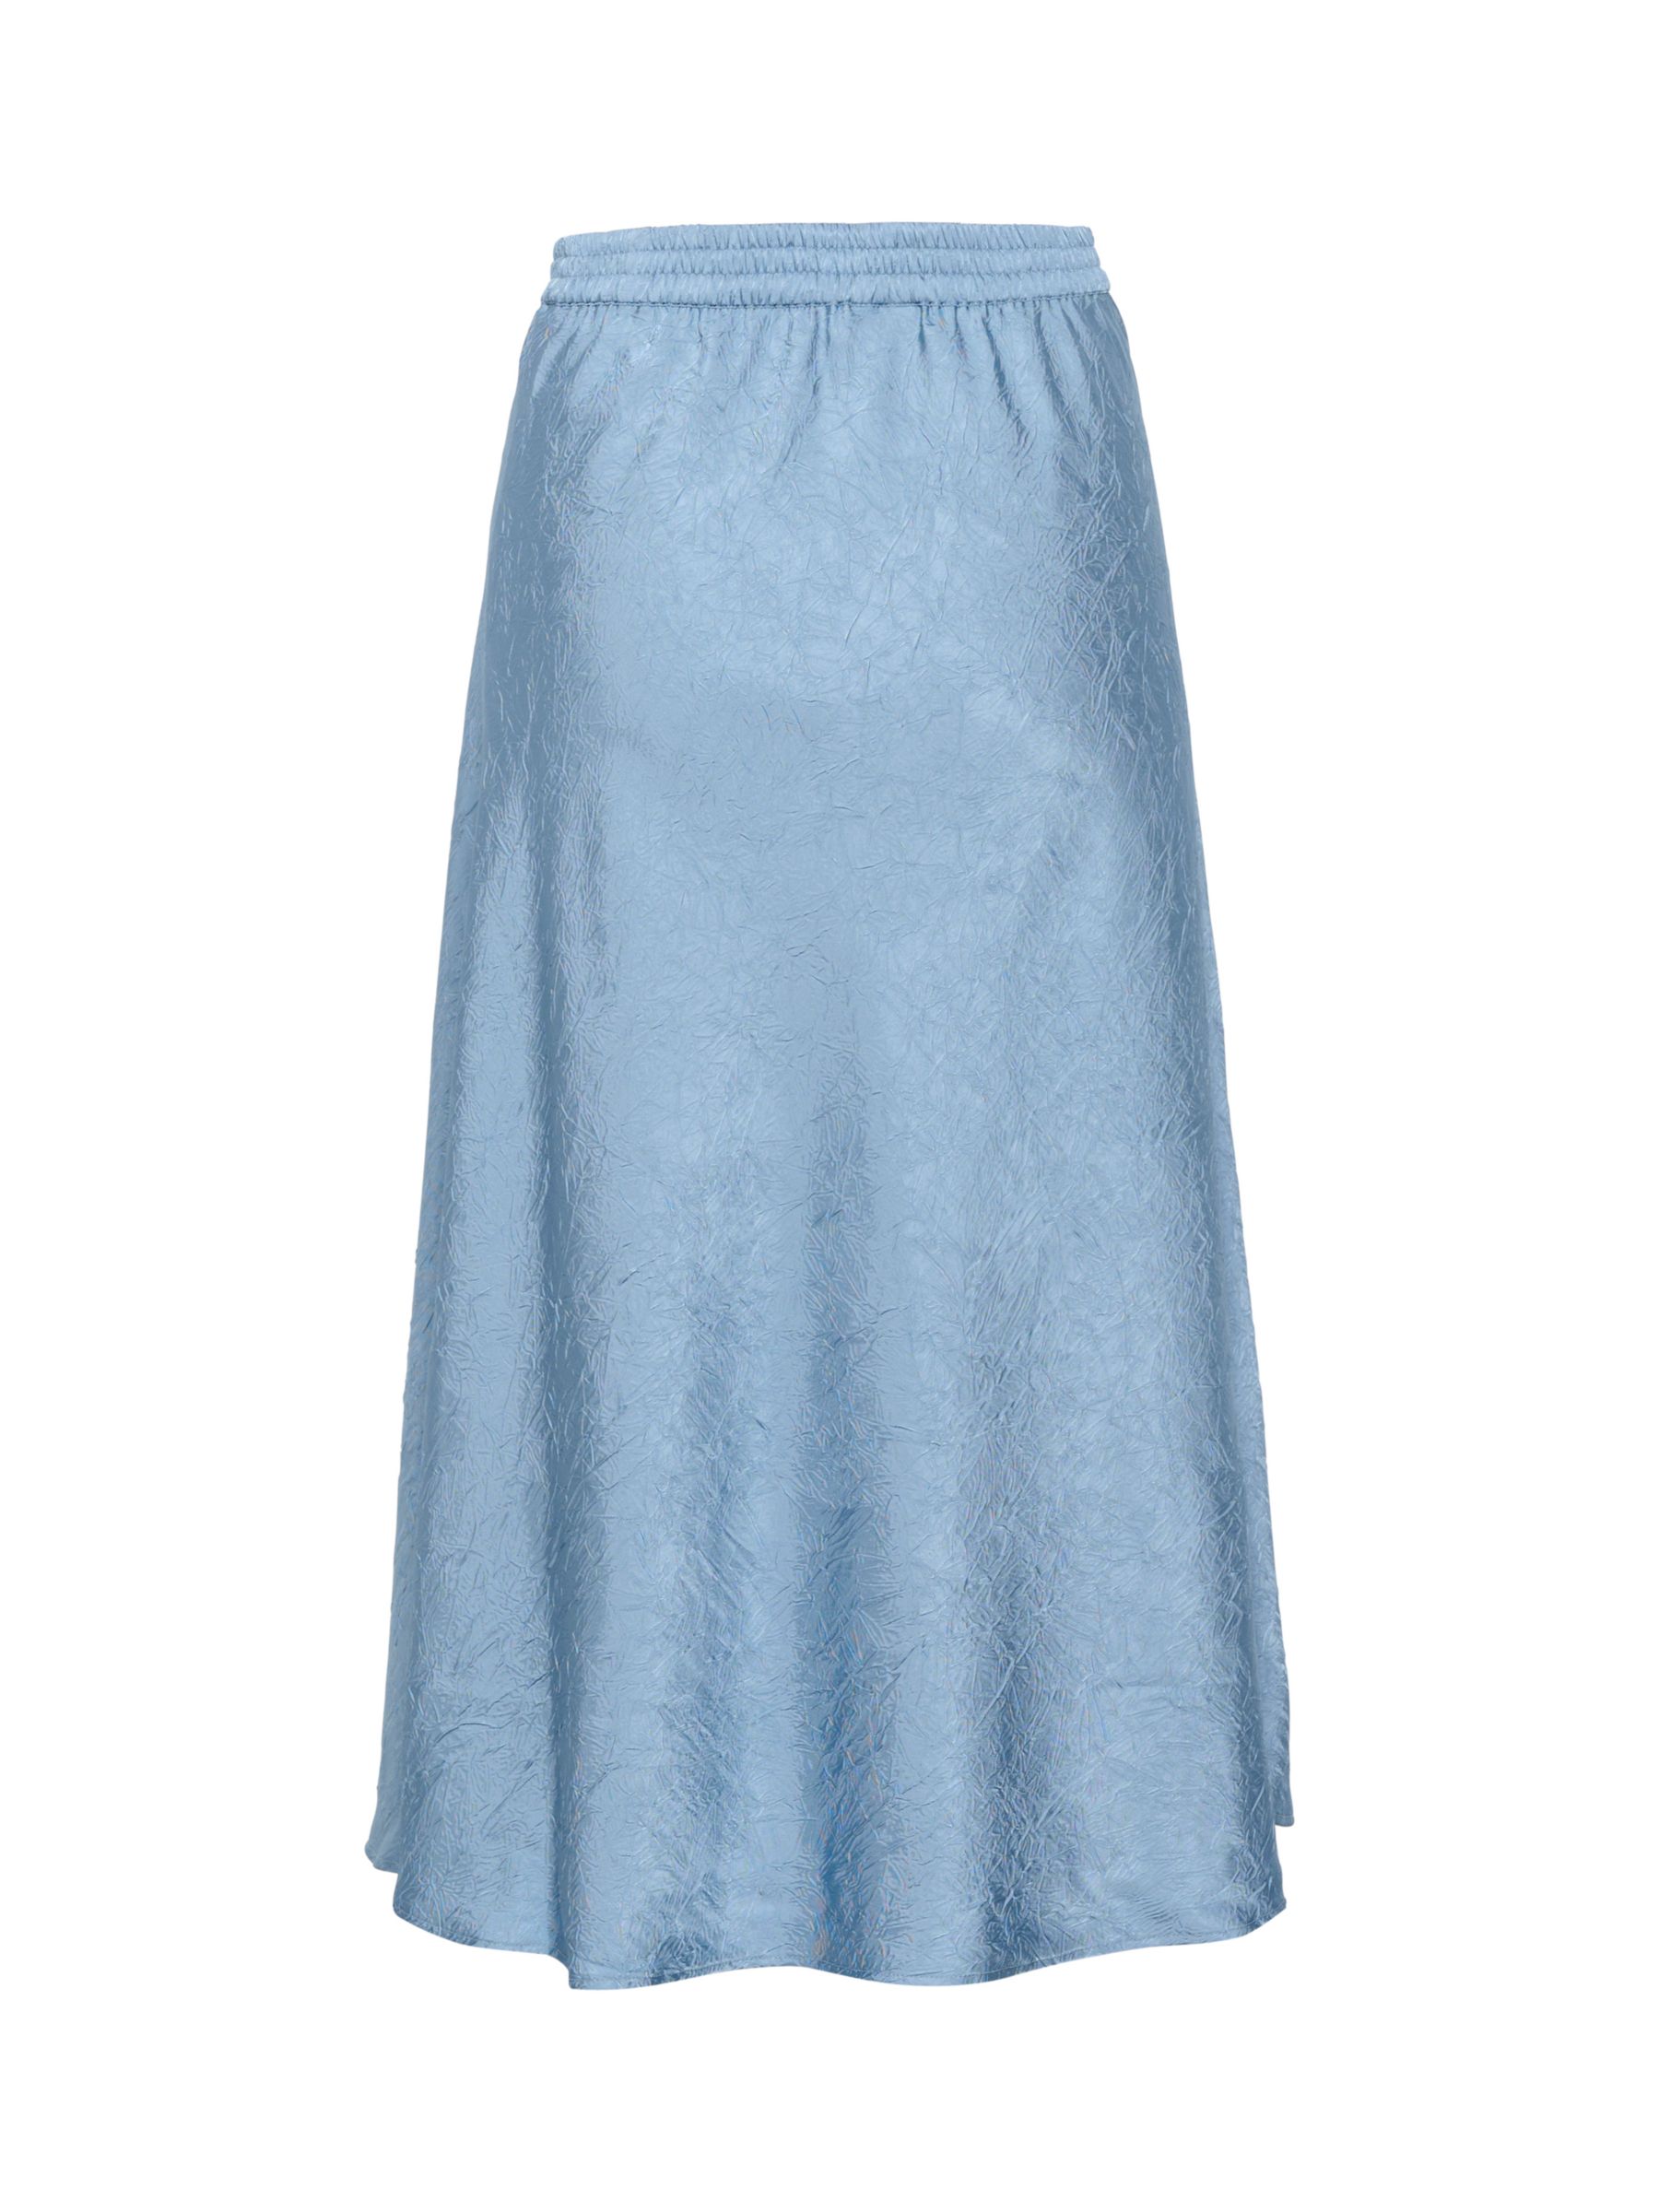 Buy Part Two Dolly High Waist Midi Skirt, Faded Denim Online at johnlewis.com